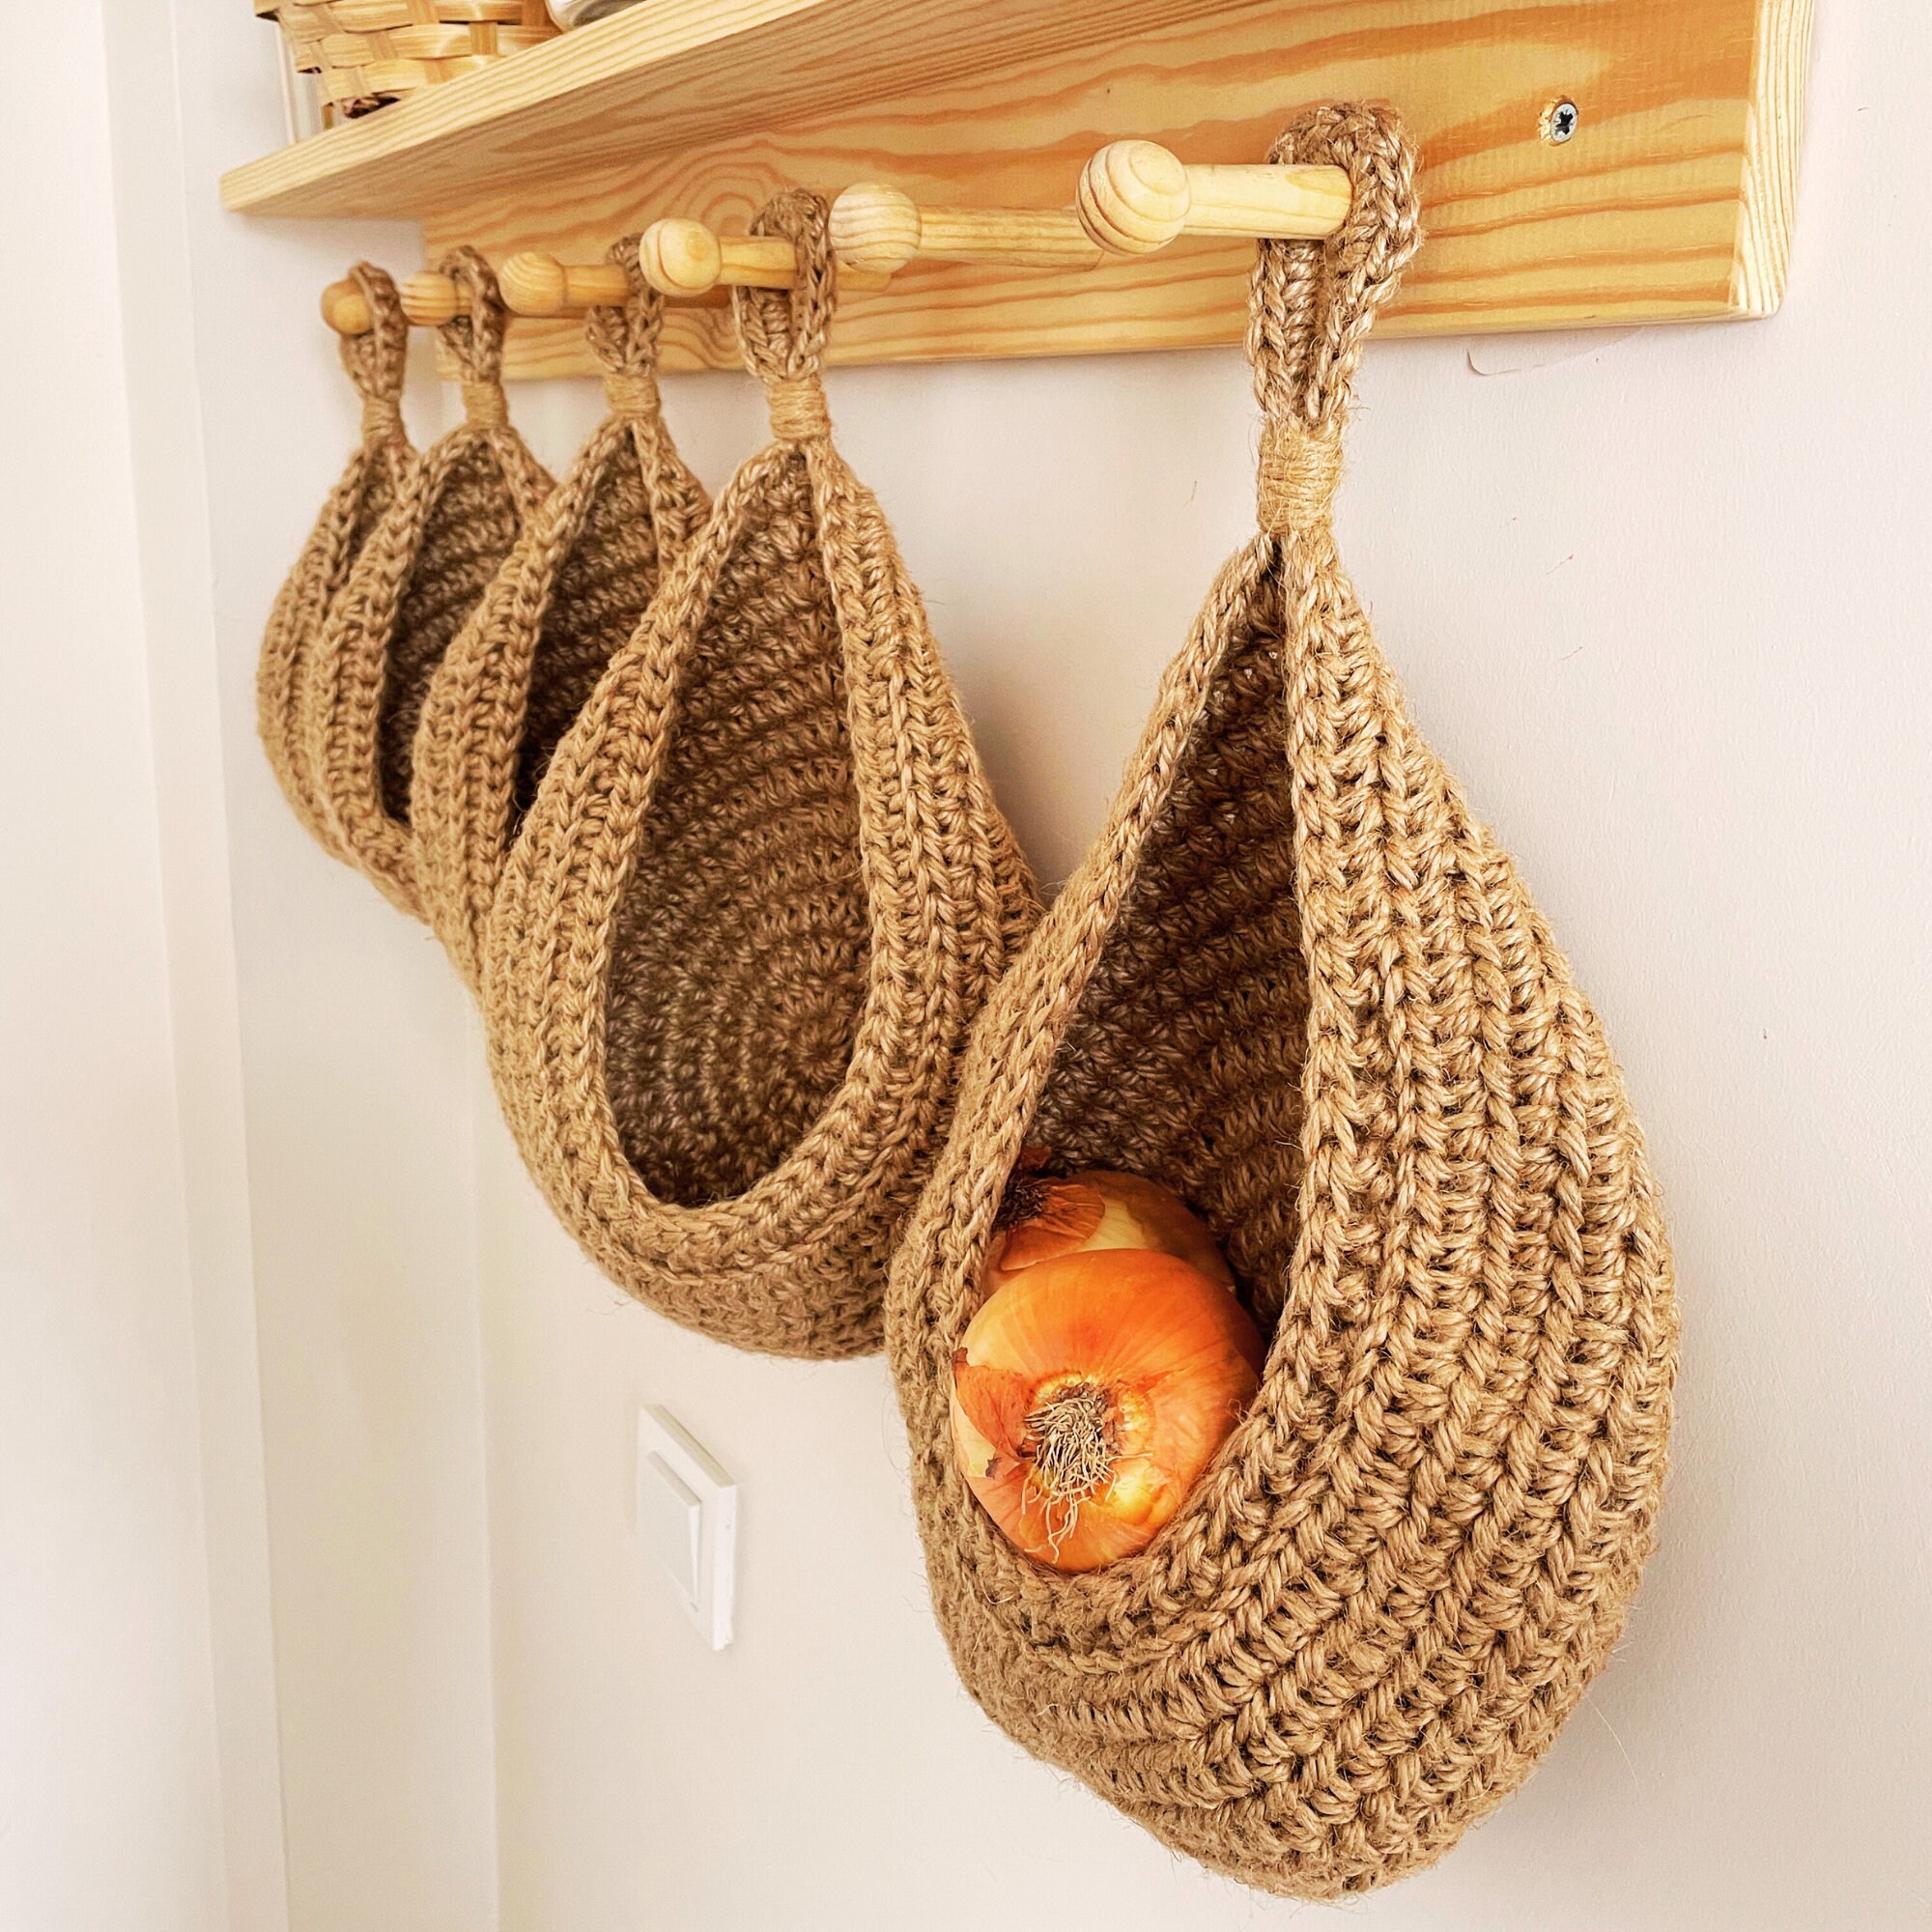 Jute Vegetable Storage Bag ($6.60) Keep your fruits and veggies organized  and fresh with our eco-friendly Jute Vegetable Storage Bag.…